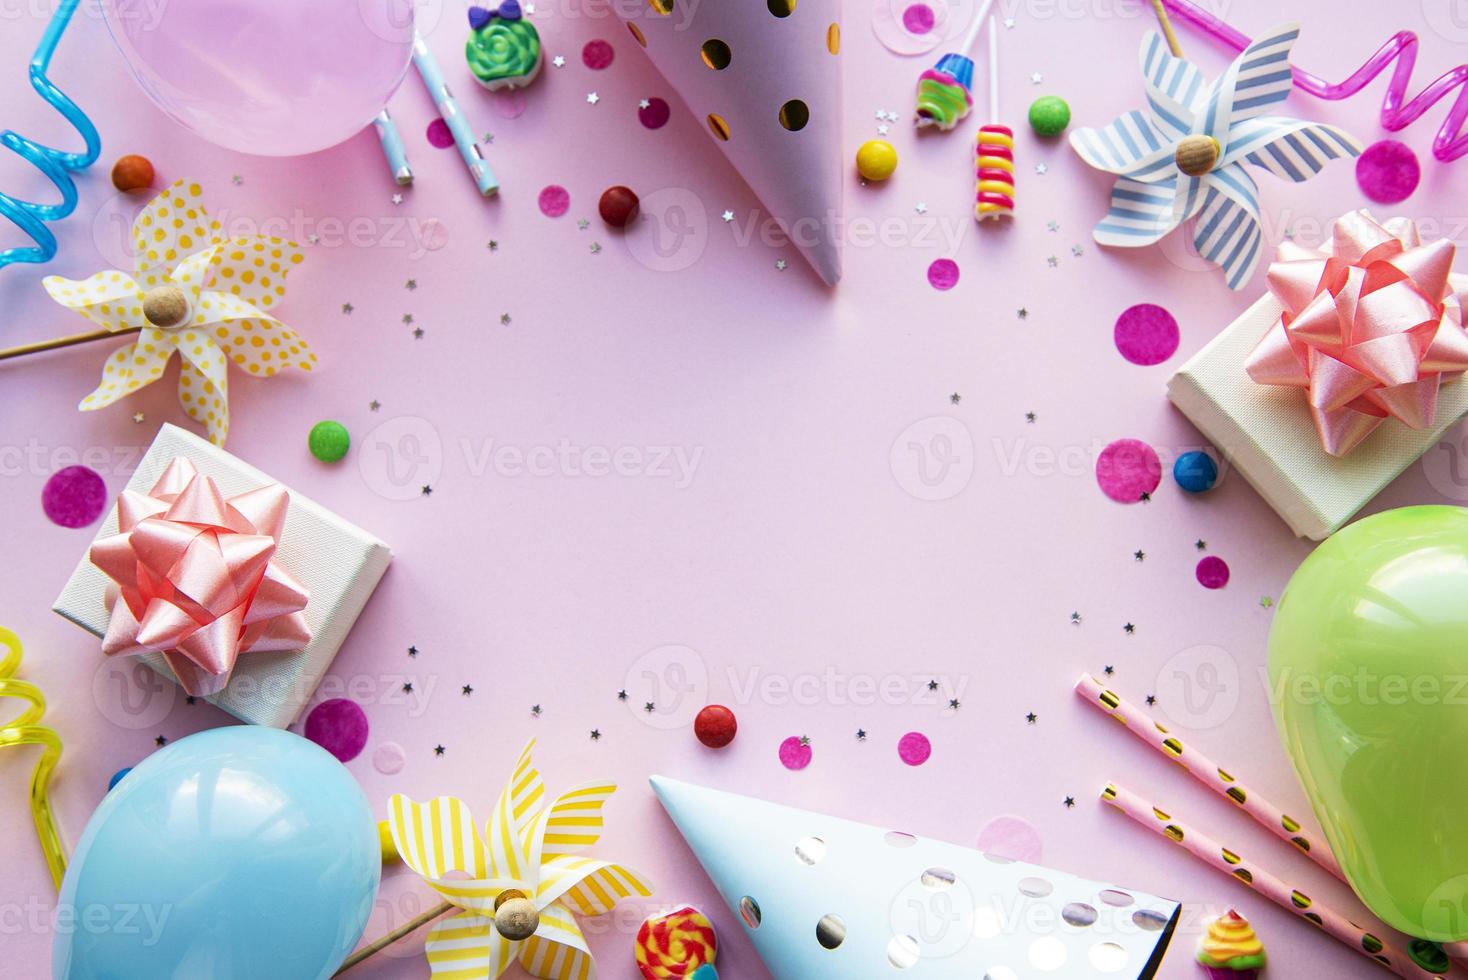 Happy birthday or party background 3702143 Stock Photo at Vecteezy